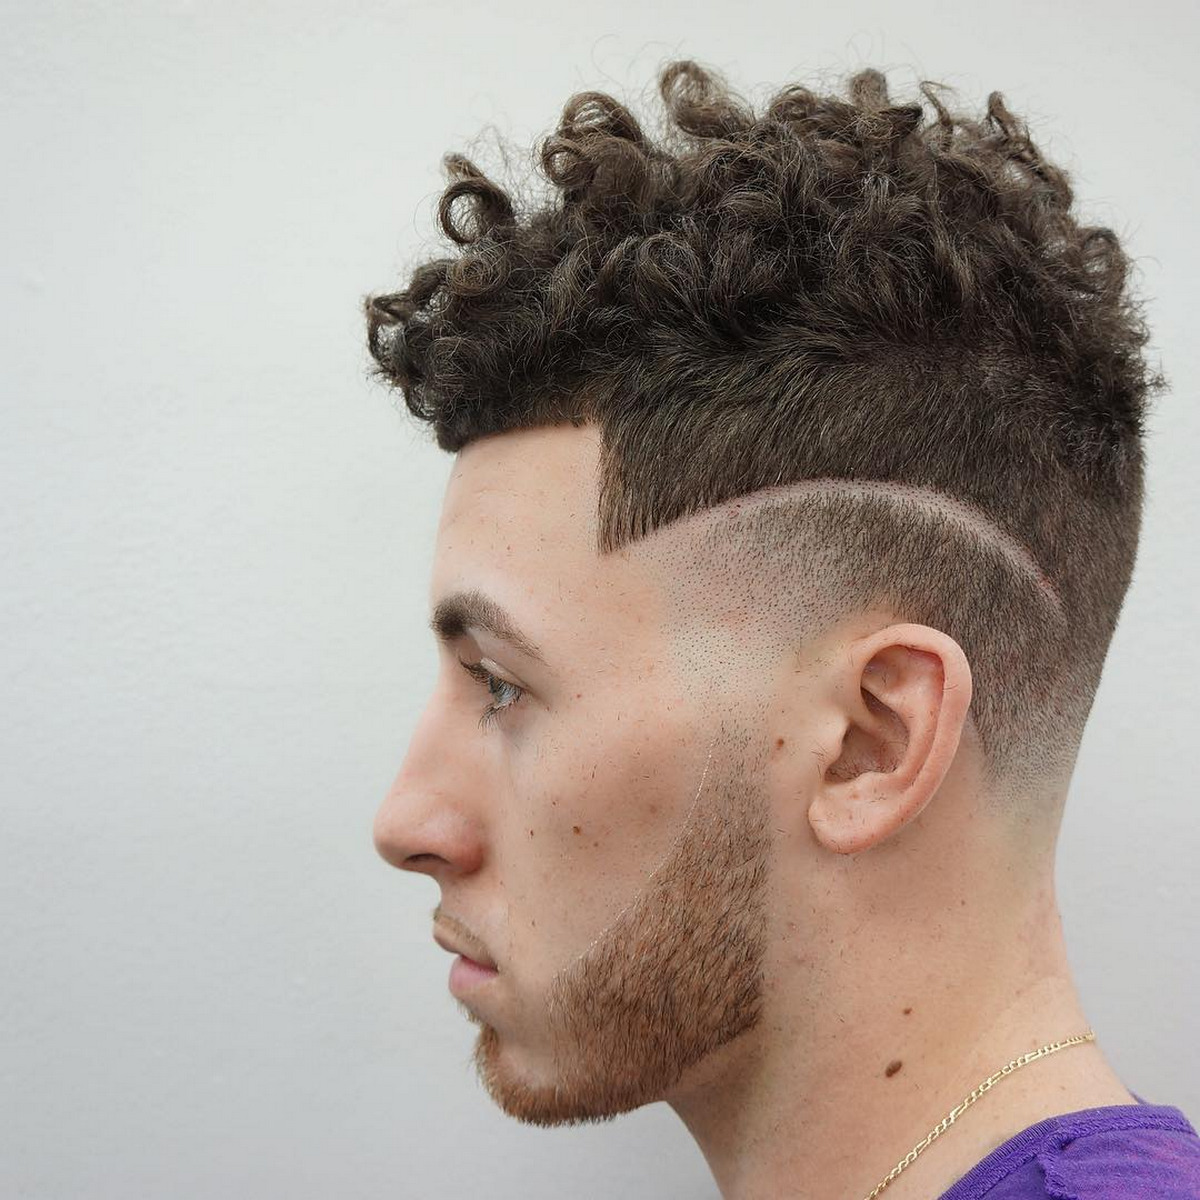 Razor Fade With Curls On Top